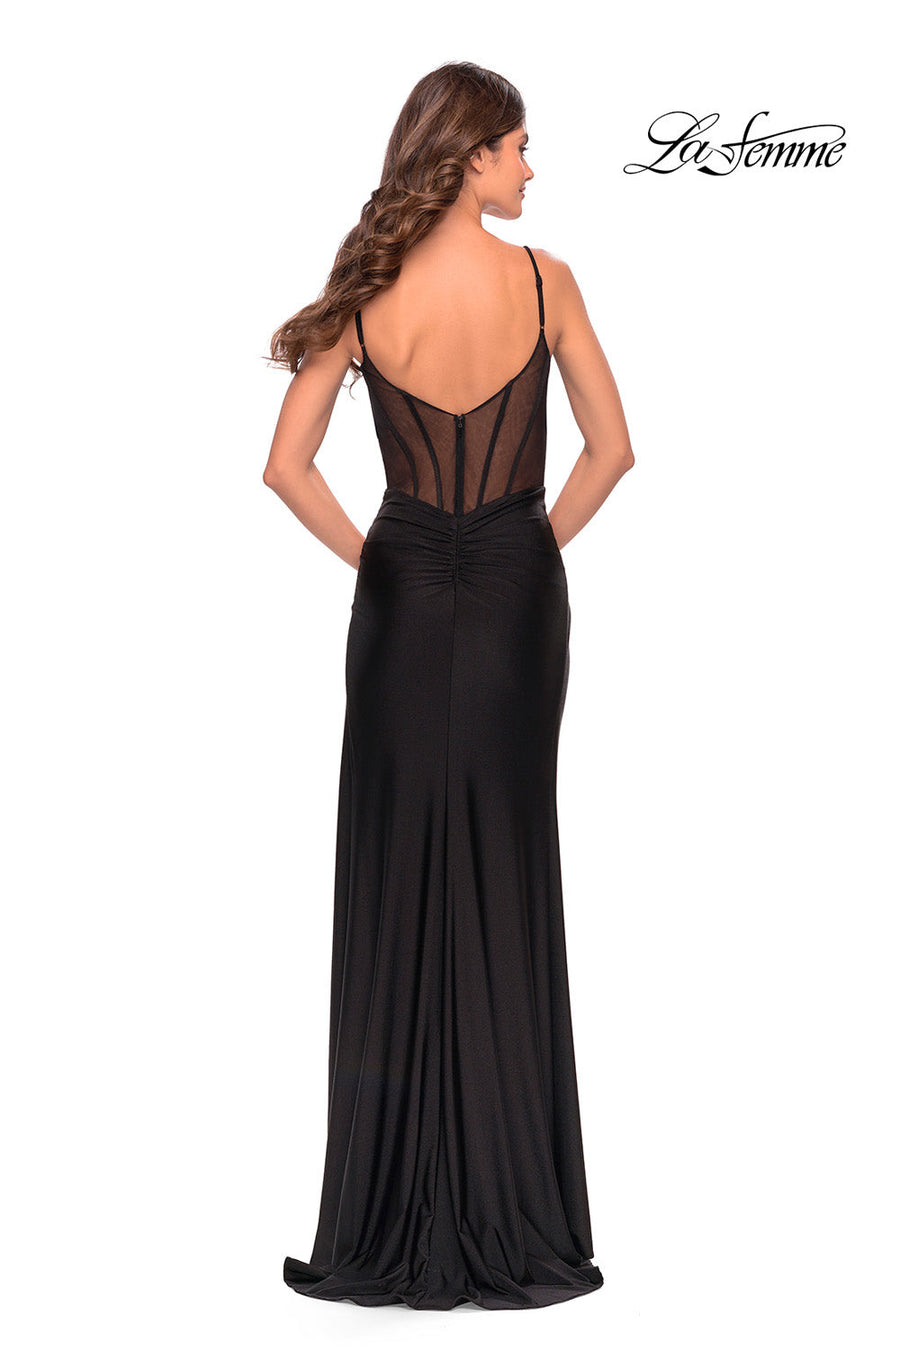 La Femme 31229 prom dress images.  La Femme 31229 is available in these colors: Black, Dark Berry, Emerald.